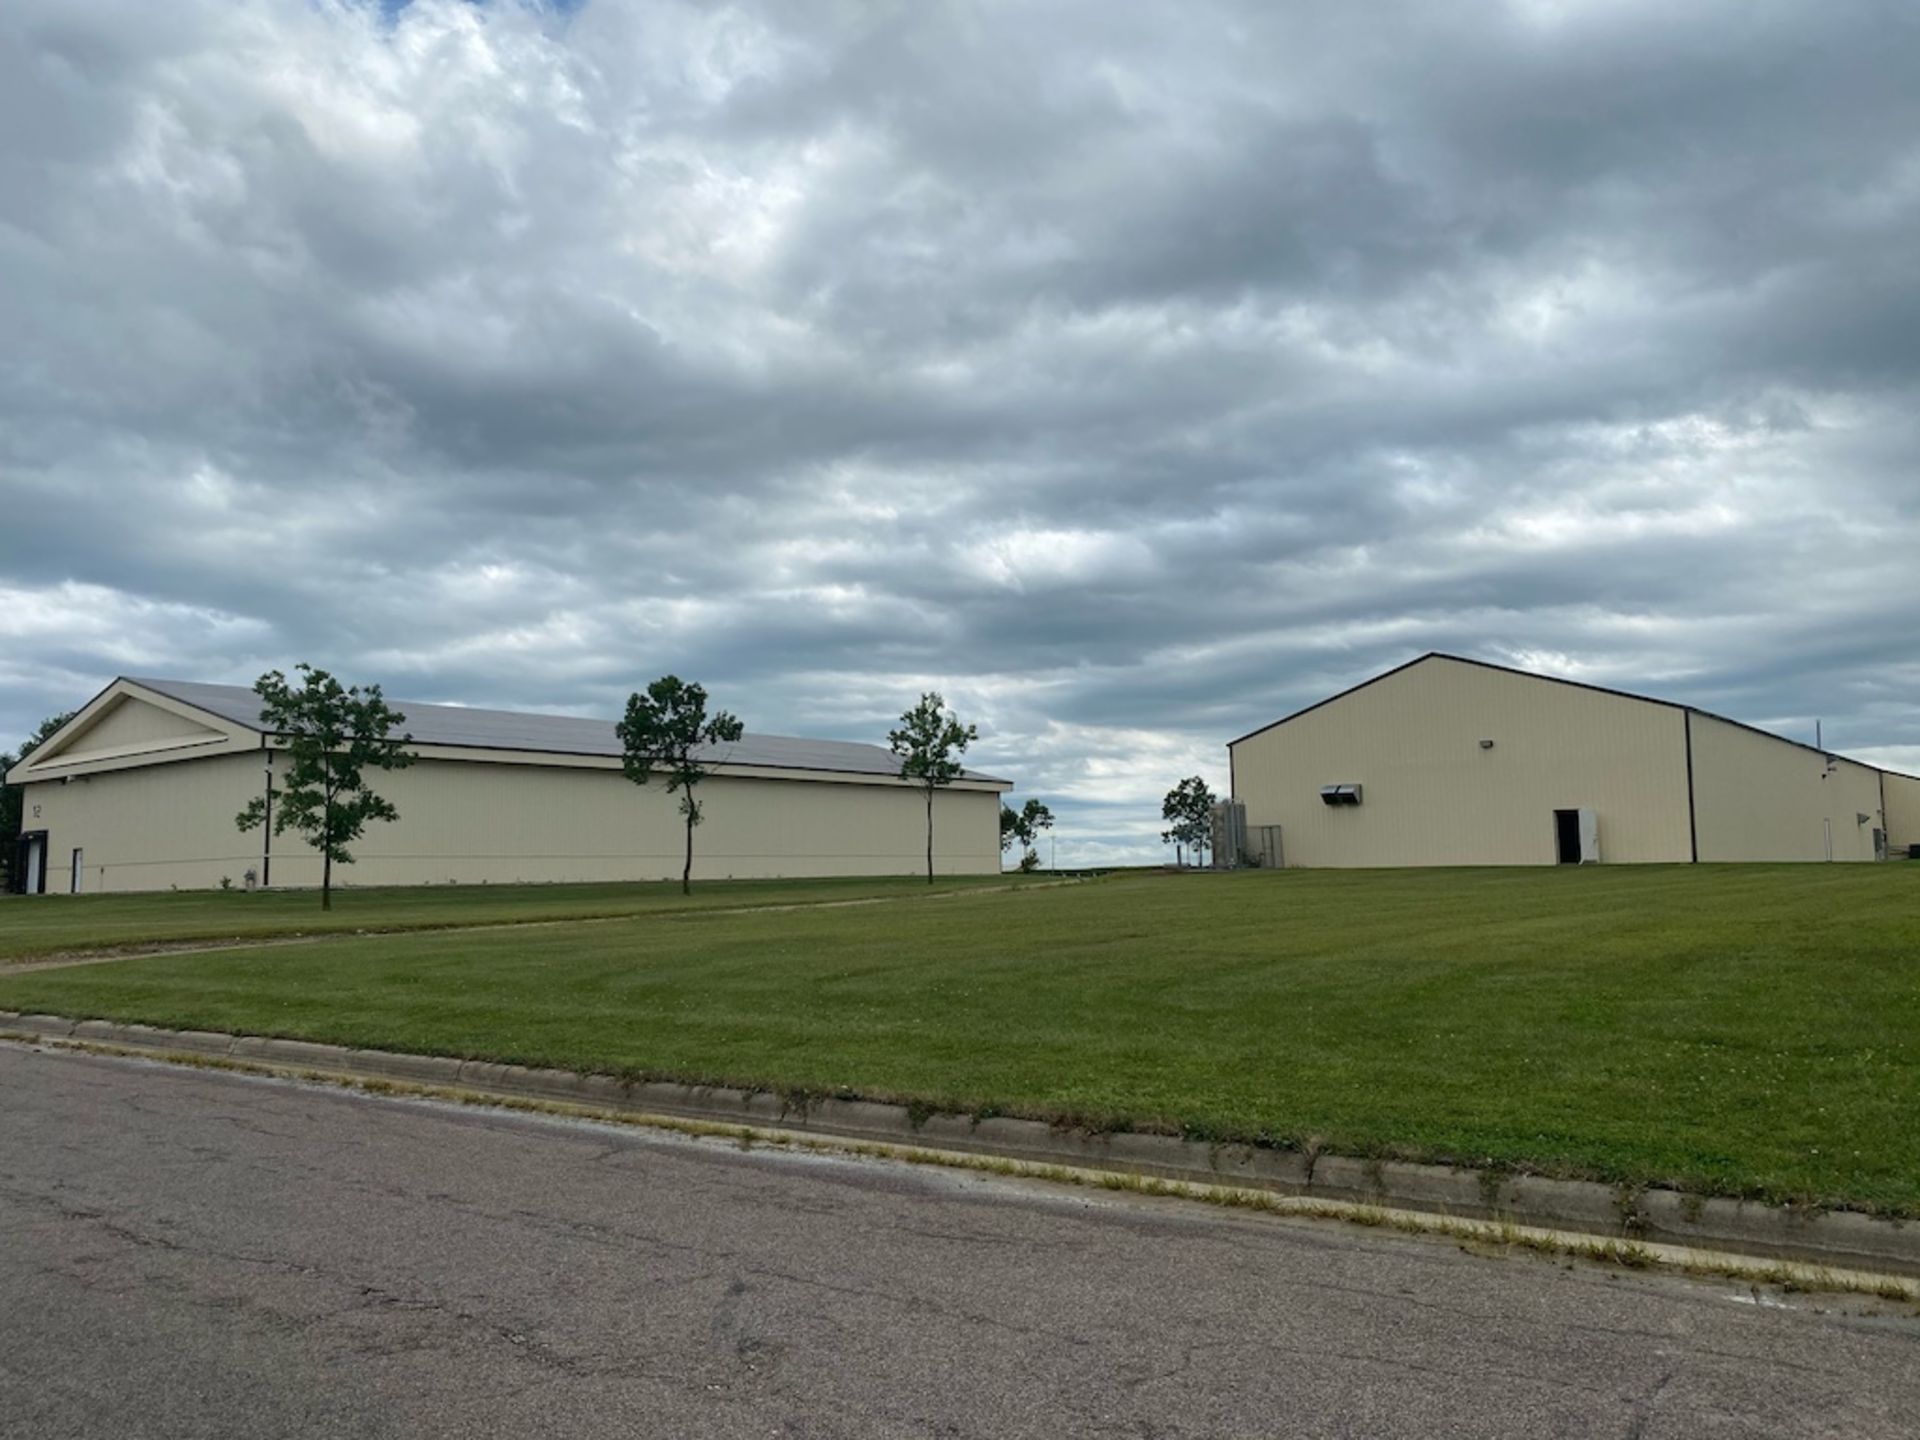 Real Estate - (3) Buildings, 85,550 Total sq./ft. on 12.75 Acres - Image 6 of 25